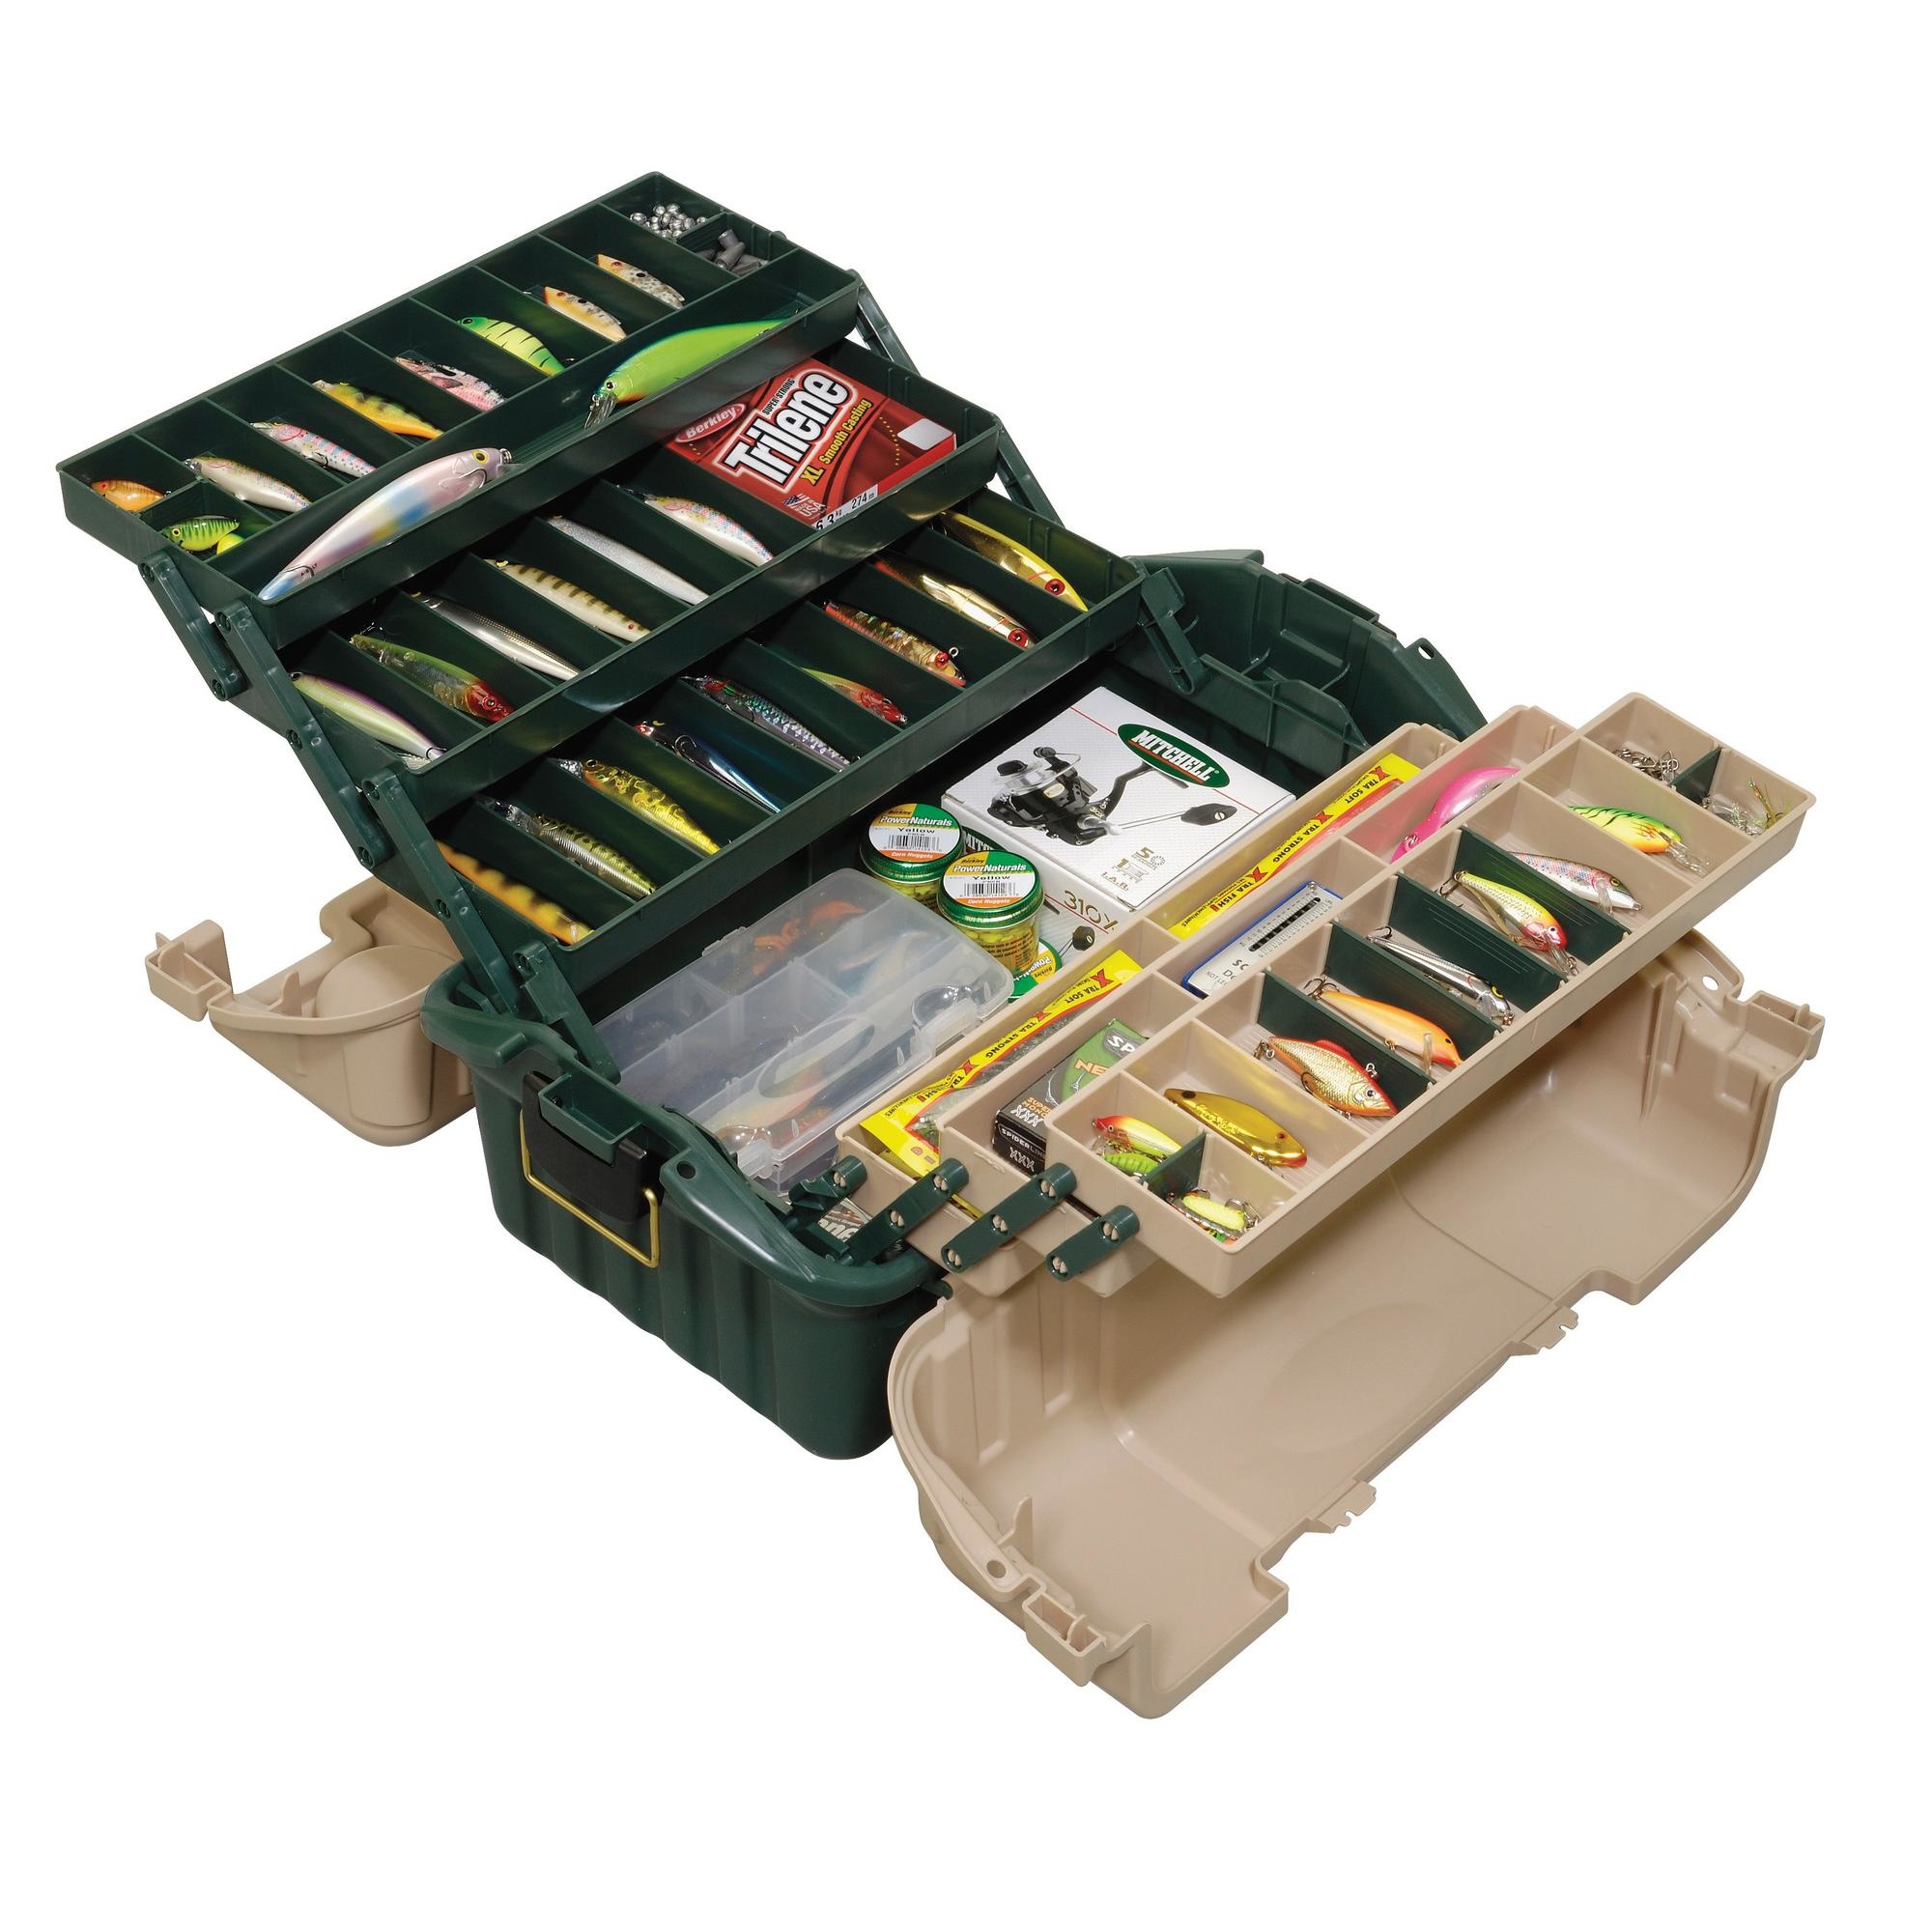 Hip Roof Tackle Box 6 Tray - Green/Sandstone